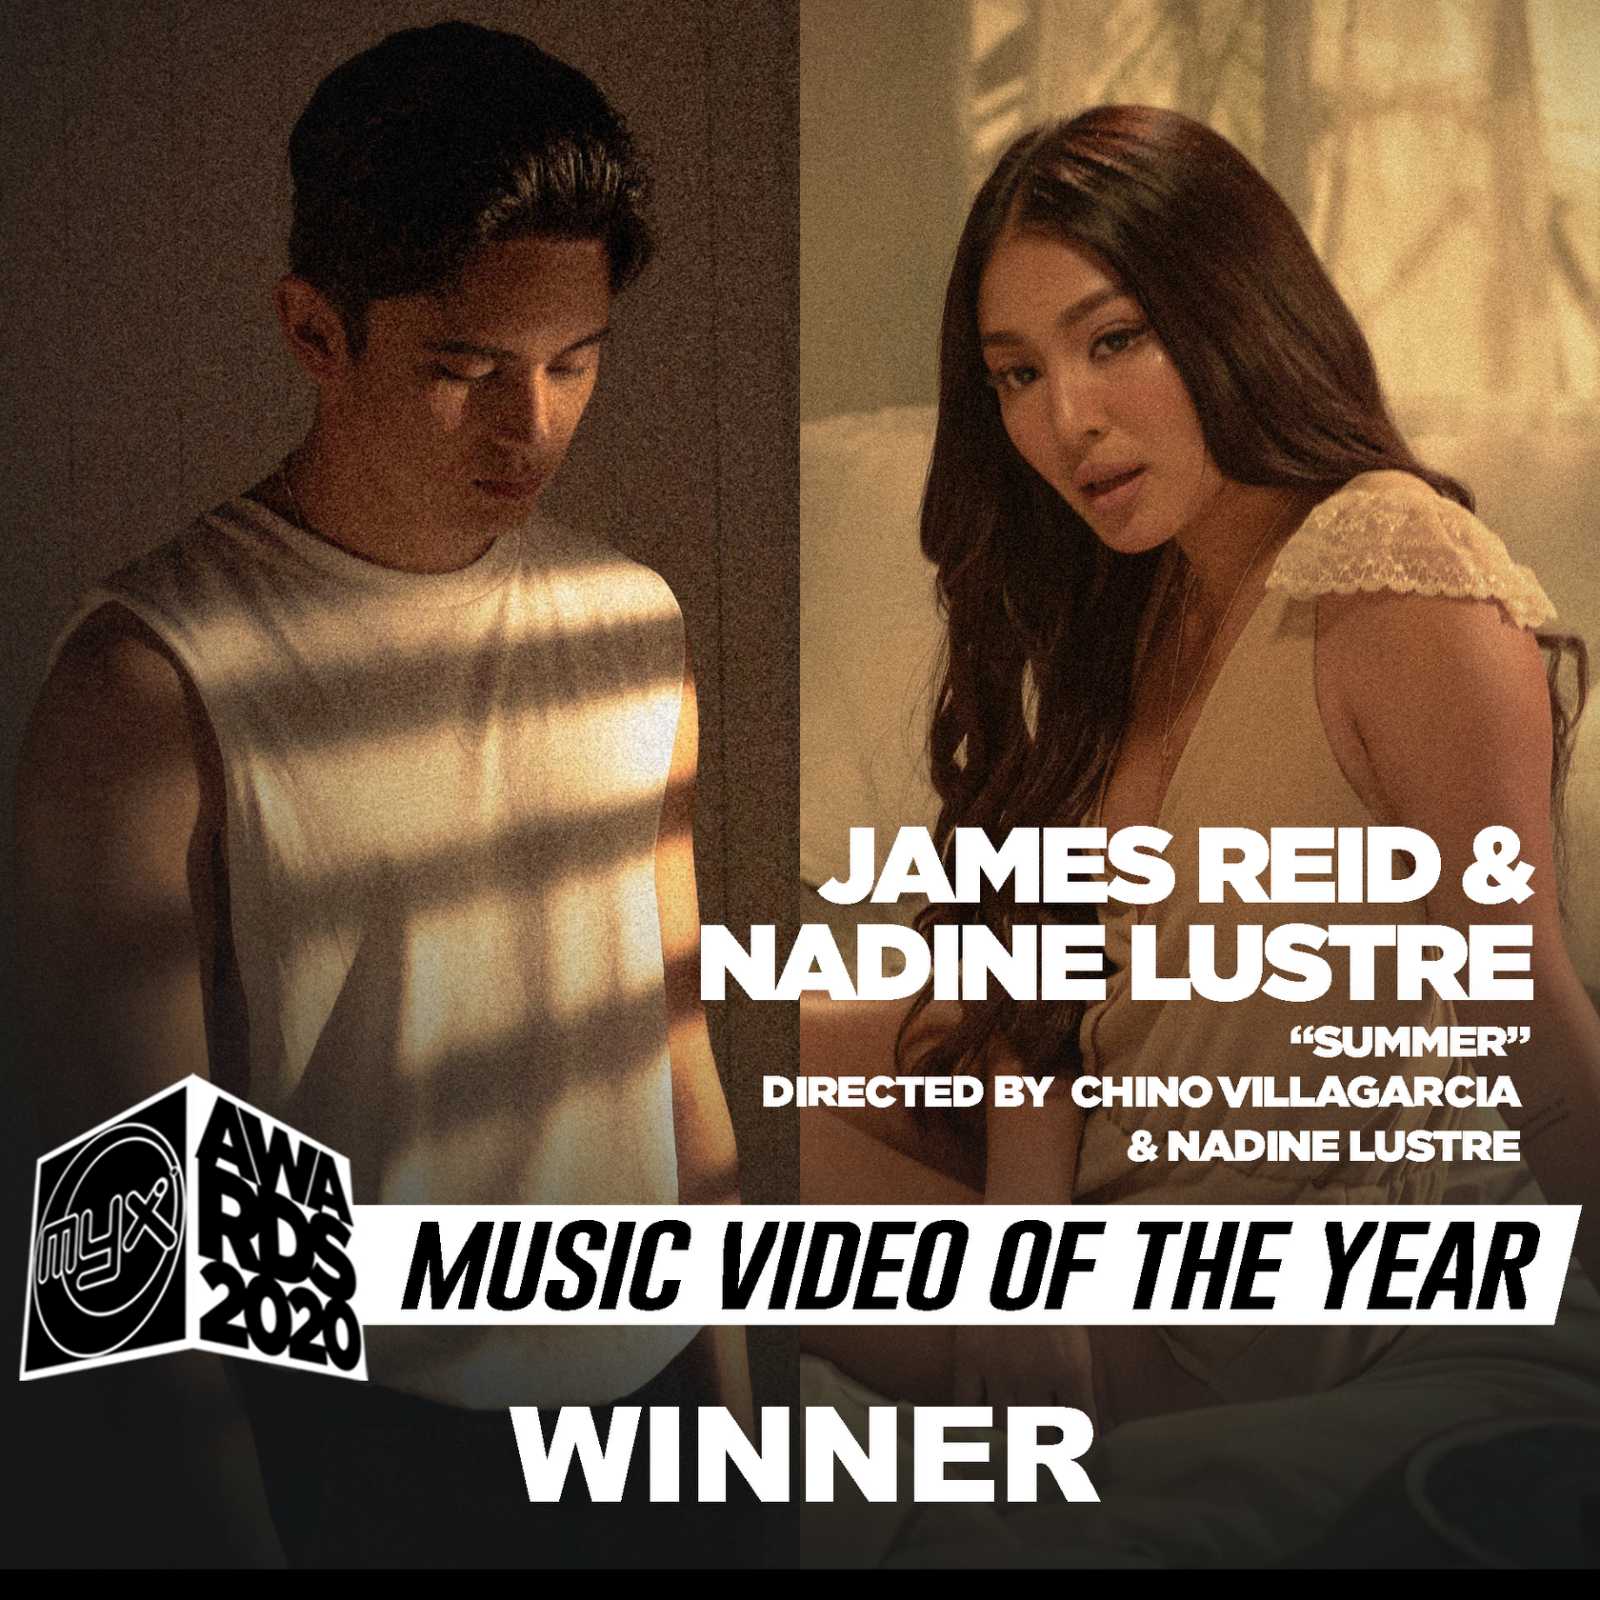 James Reid and Nadine Lustre win Music Video of the Year for Summer